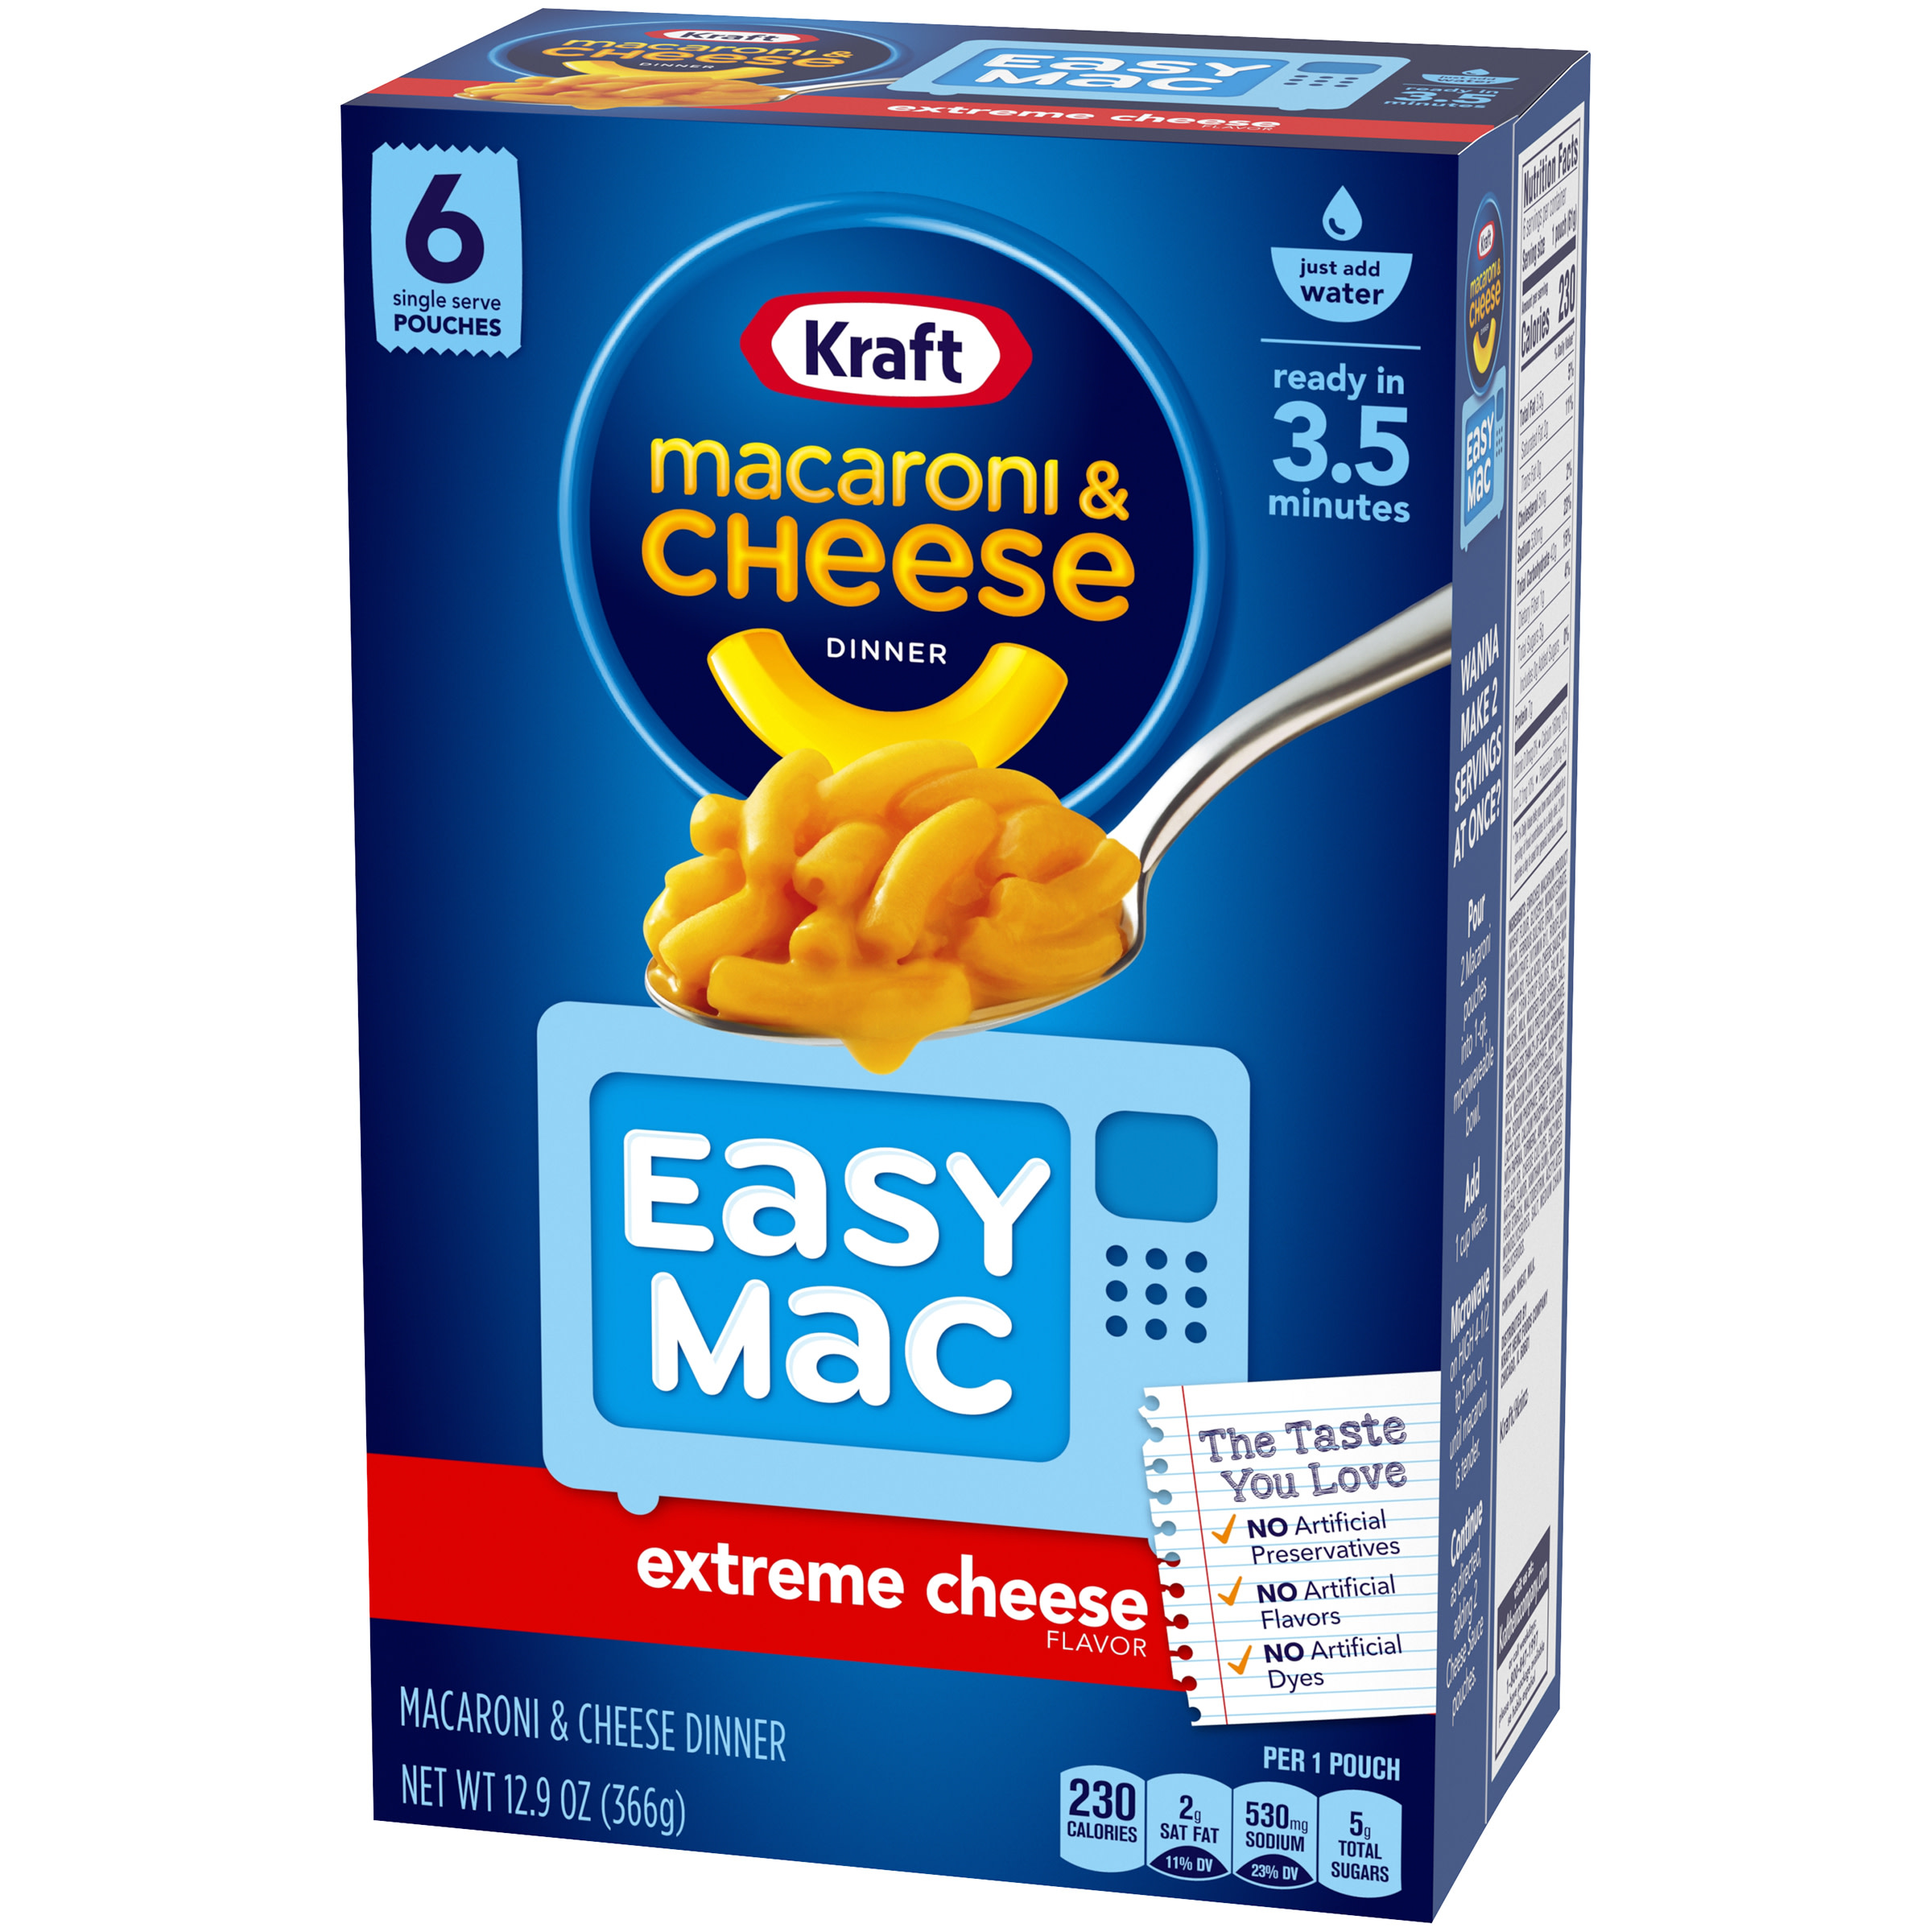 Kraft Easy Mac Extreme Cheese Mac N Cheese Macaroni and Cheese Microwavable Dinner, 6 ct Packets - image 4 of 8